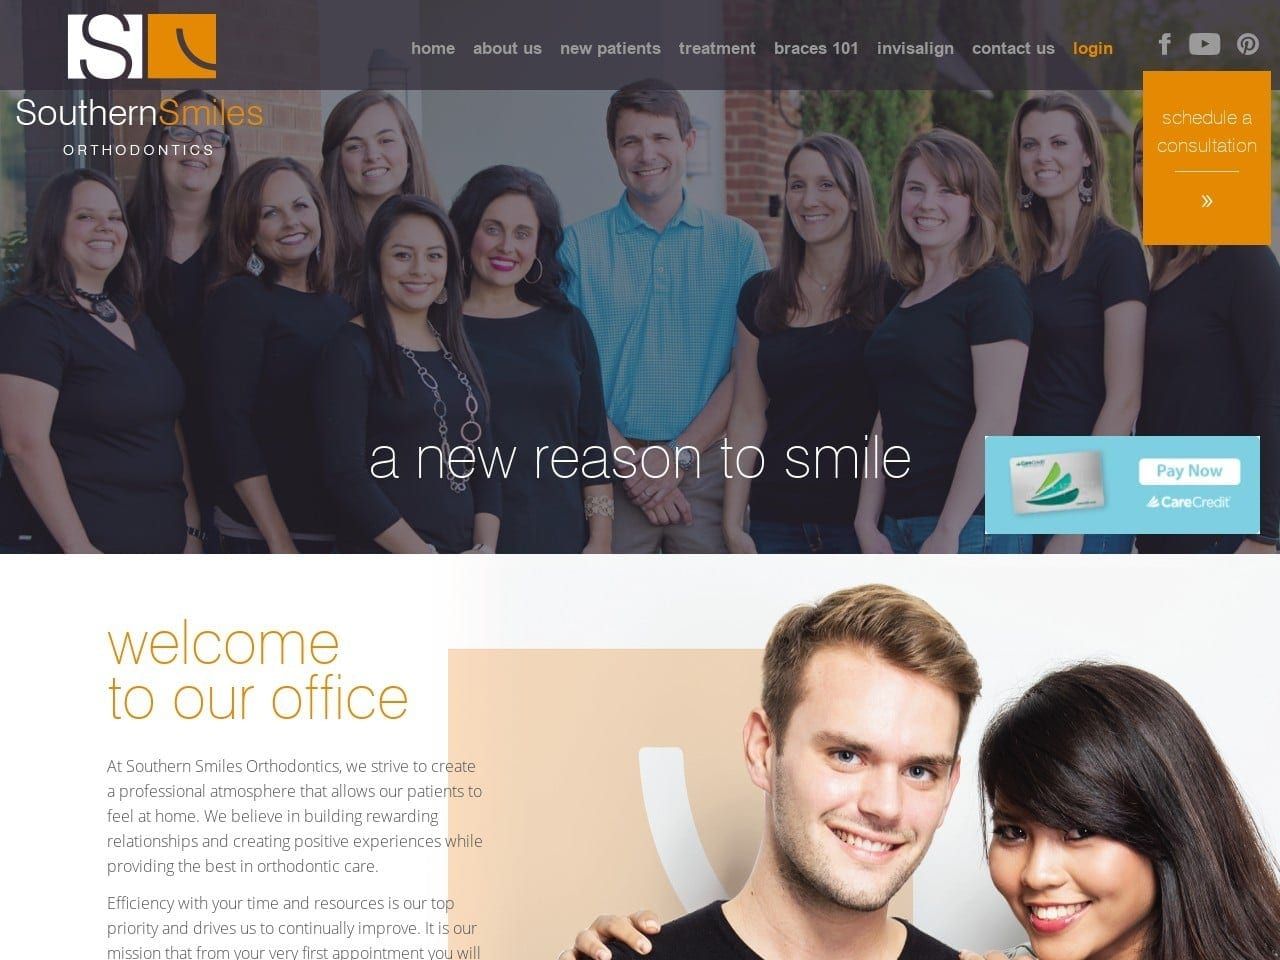 Southern Smiles Orthodontics Website Screenshot from southernsmilesortho.com